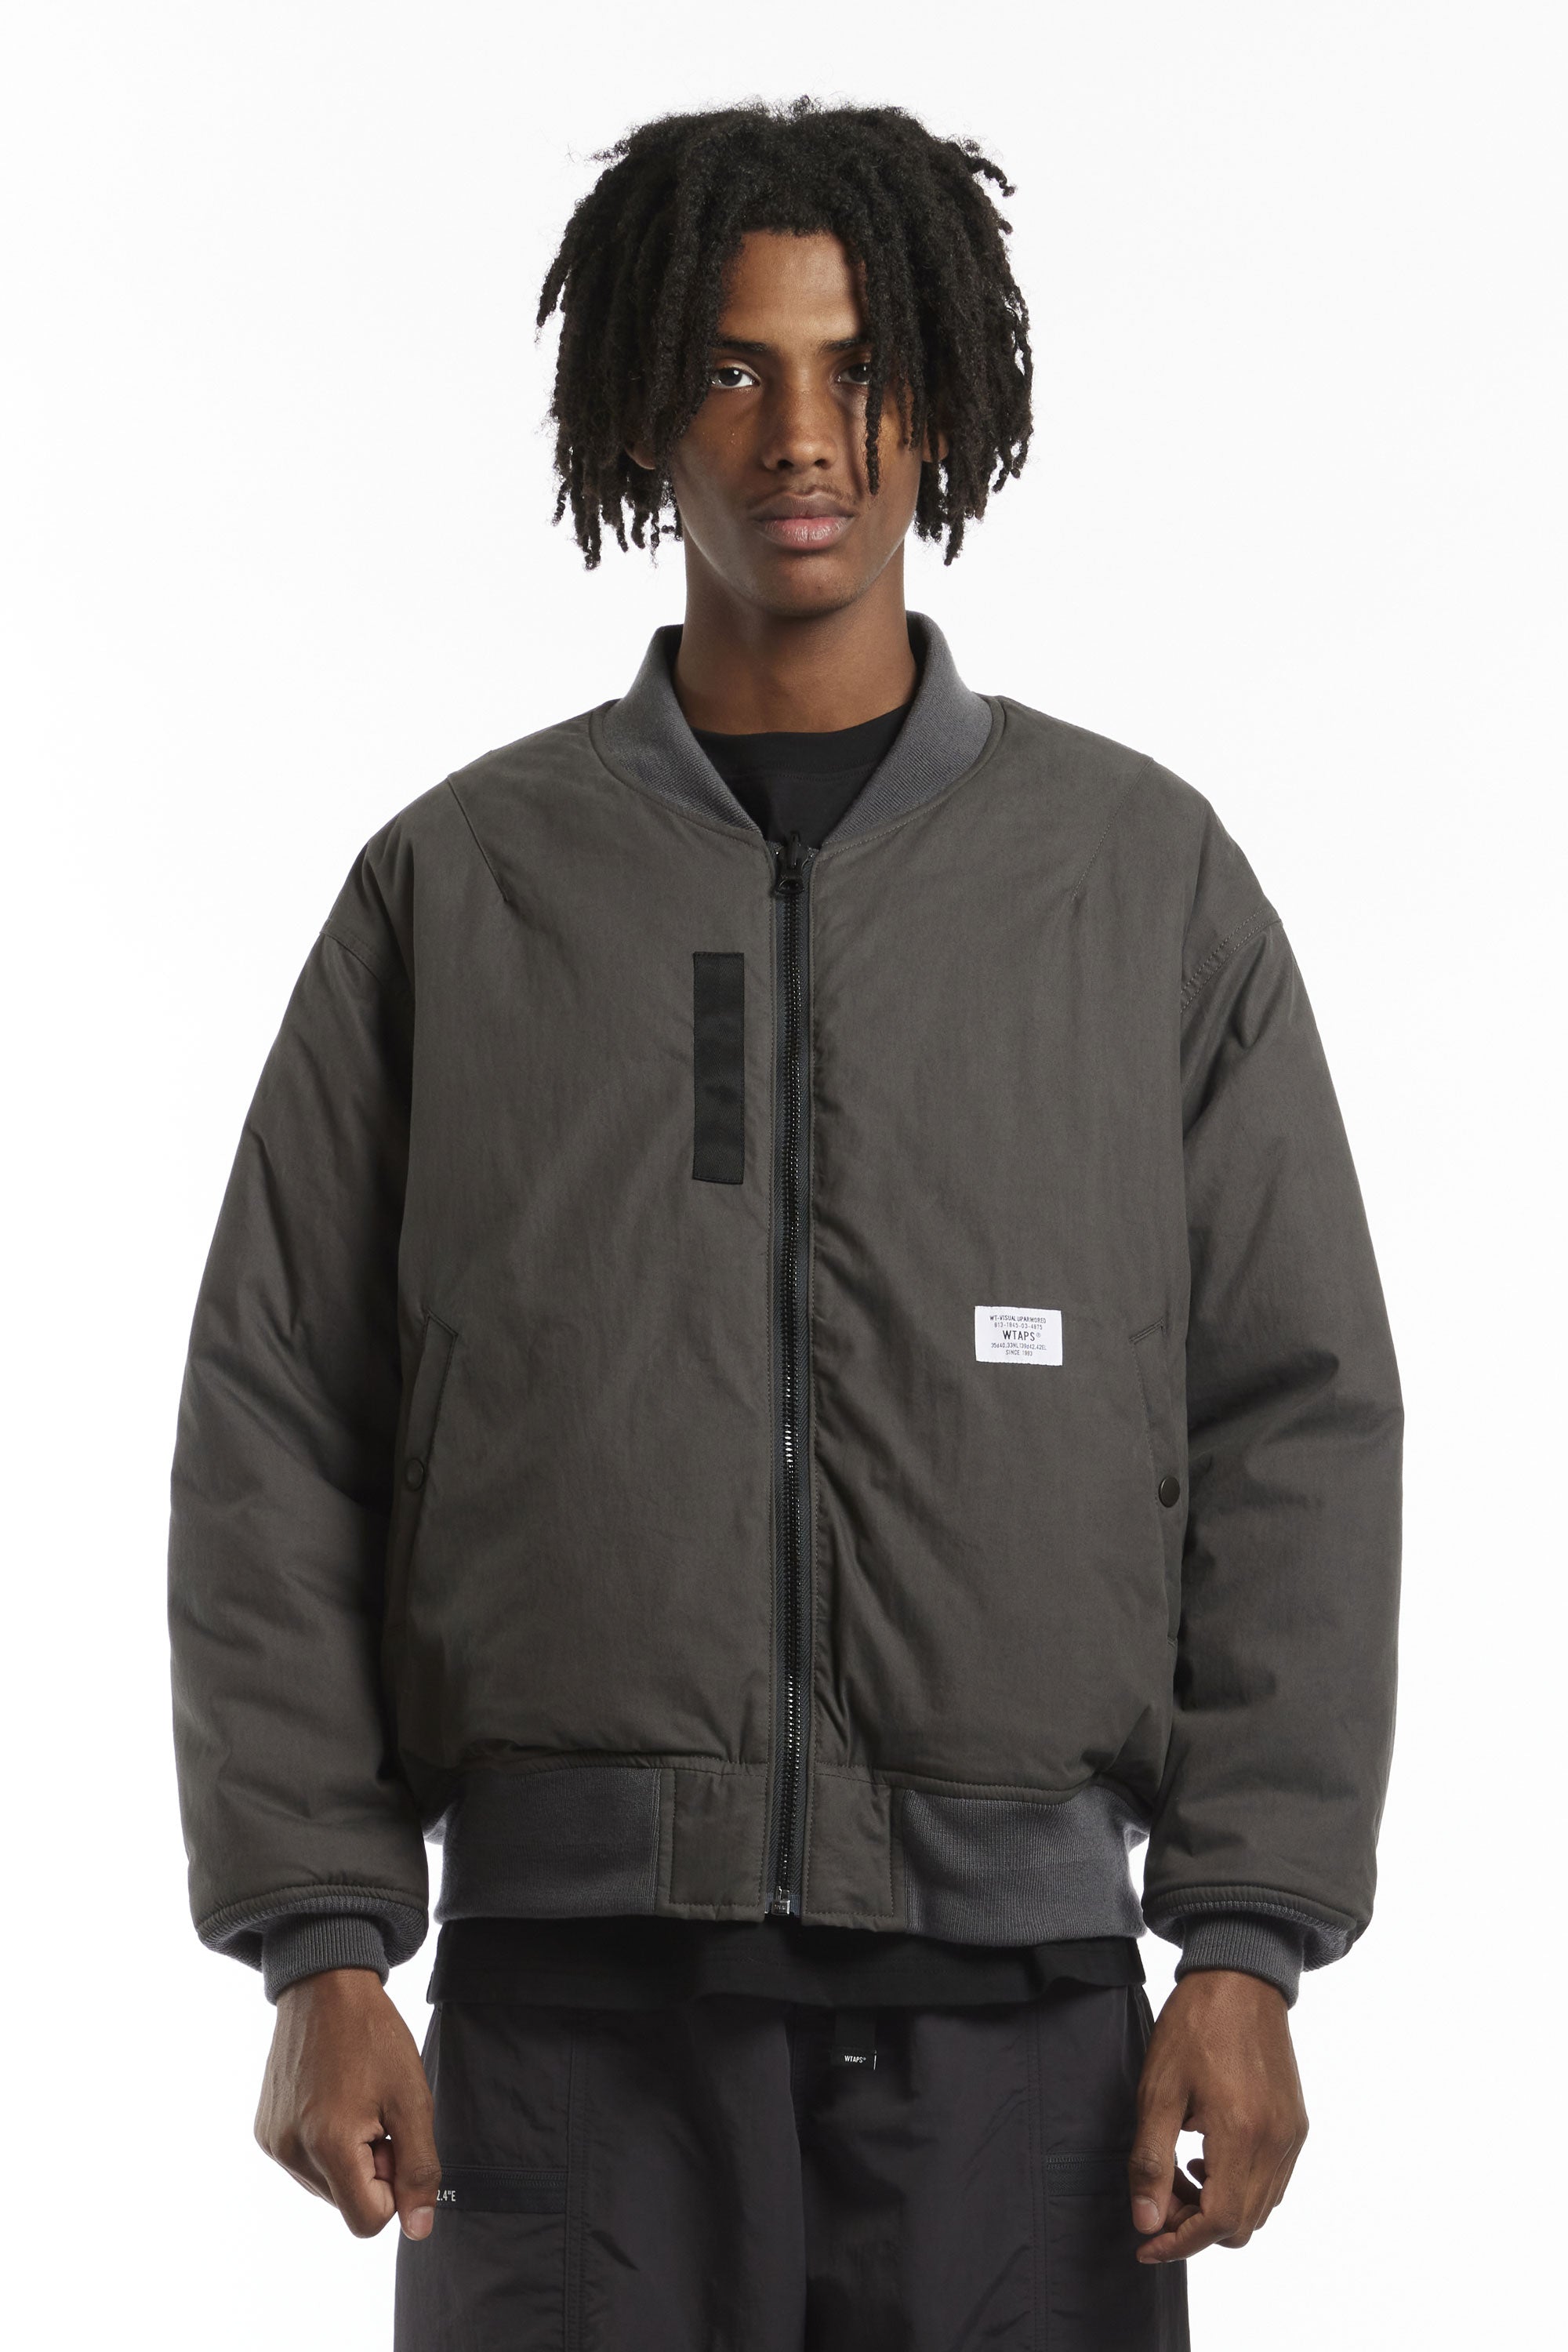 WTAPS - JFW-02 WEATHER JACKET – P.A.M. (Perks And Mini)